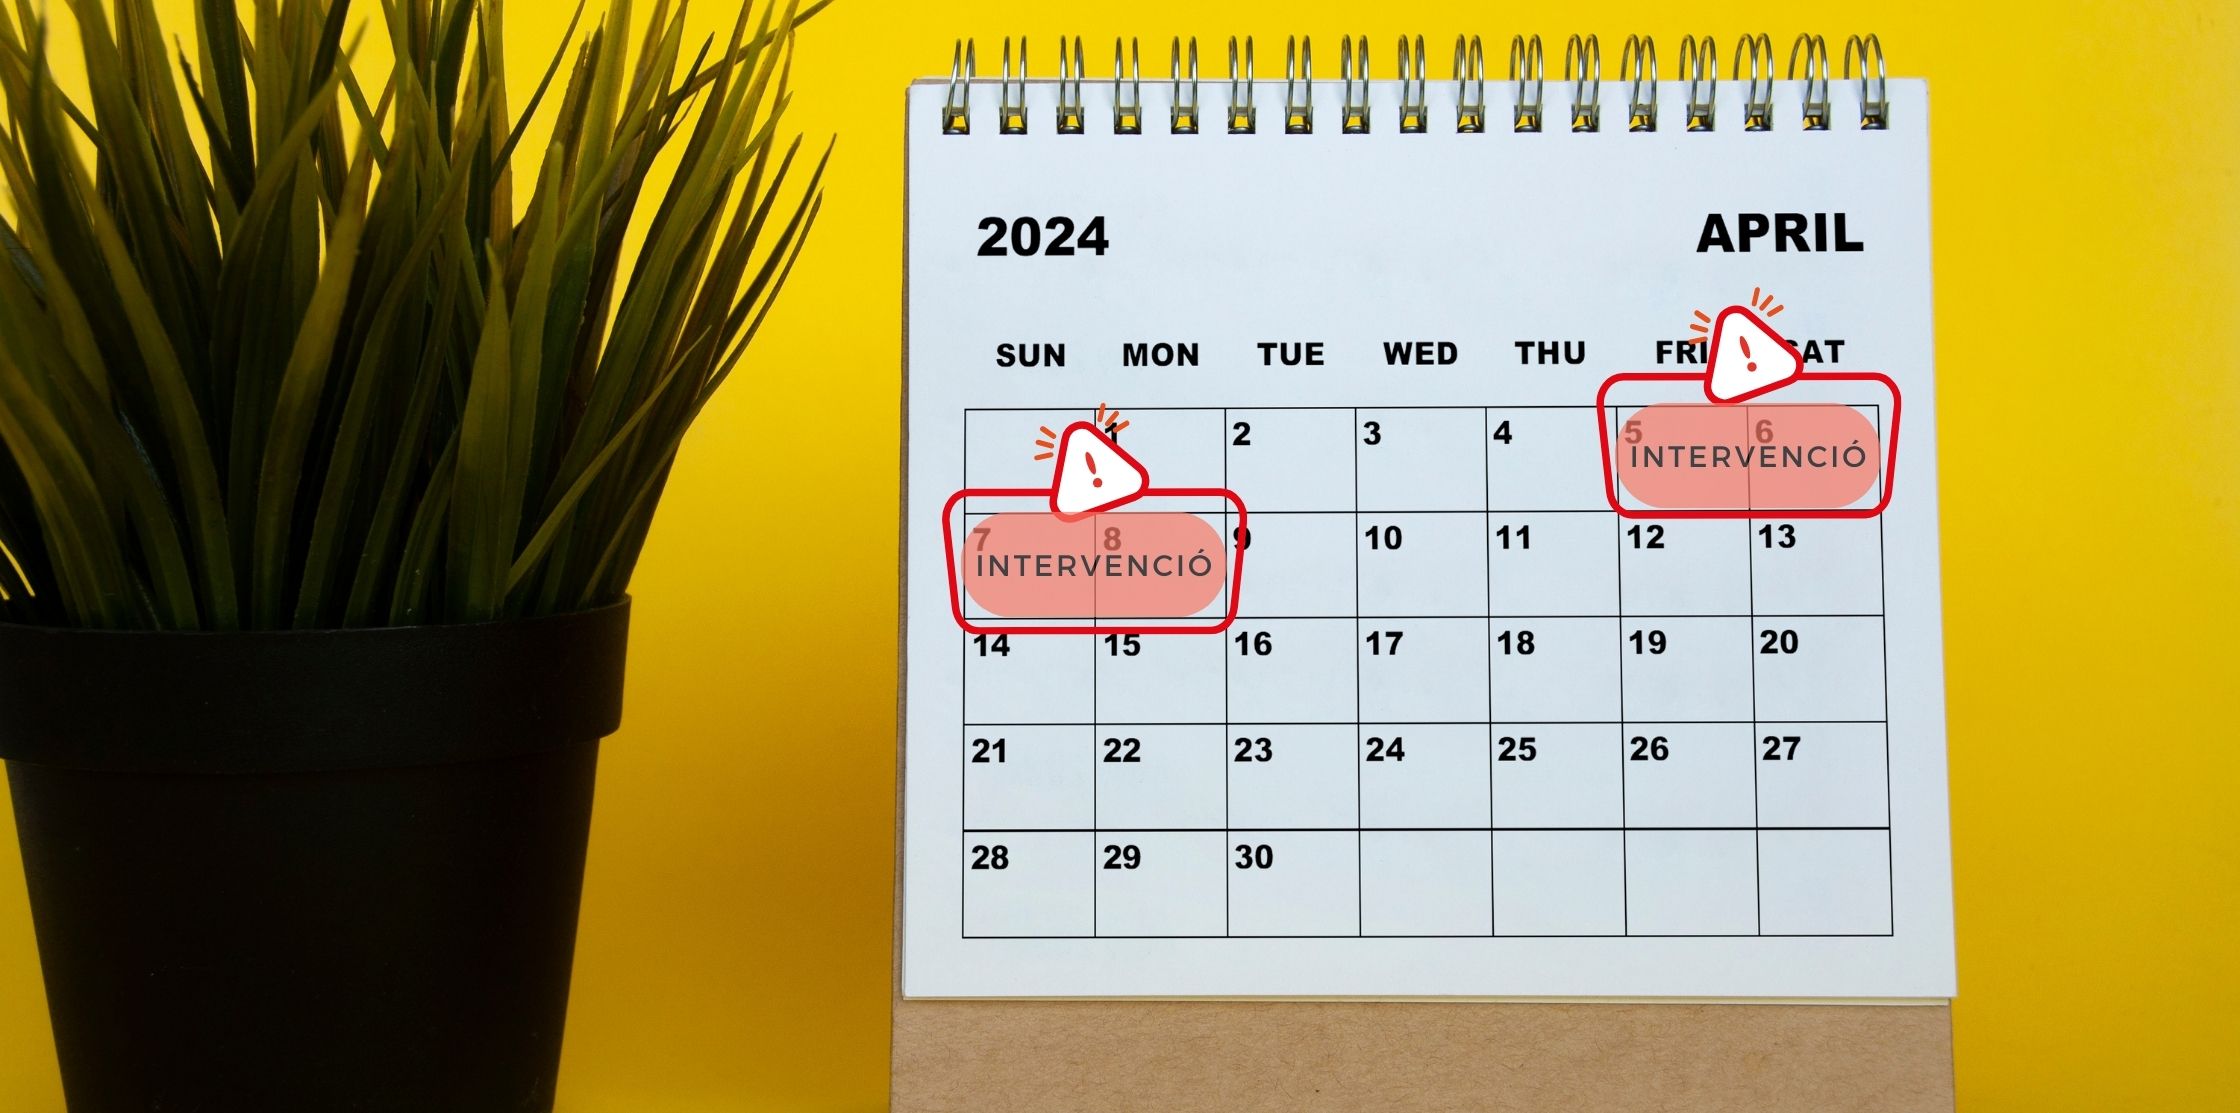 Calendar for the month of April 2024 where the intervention is marked which will involve a cut to quite a few AOC services, specifically from 5 to 8 April.